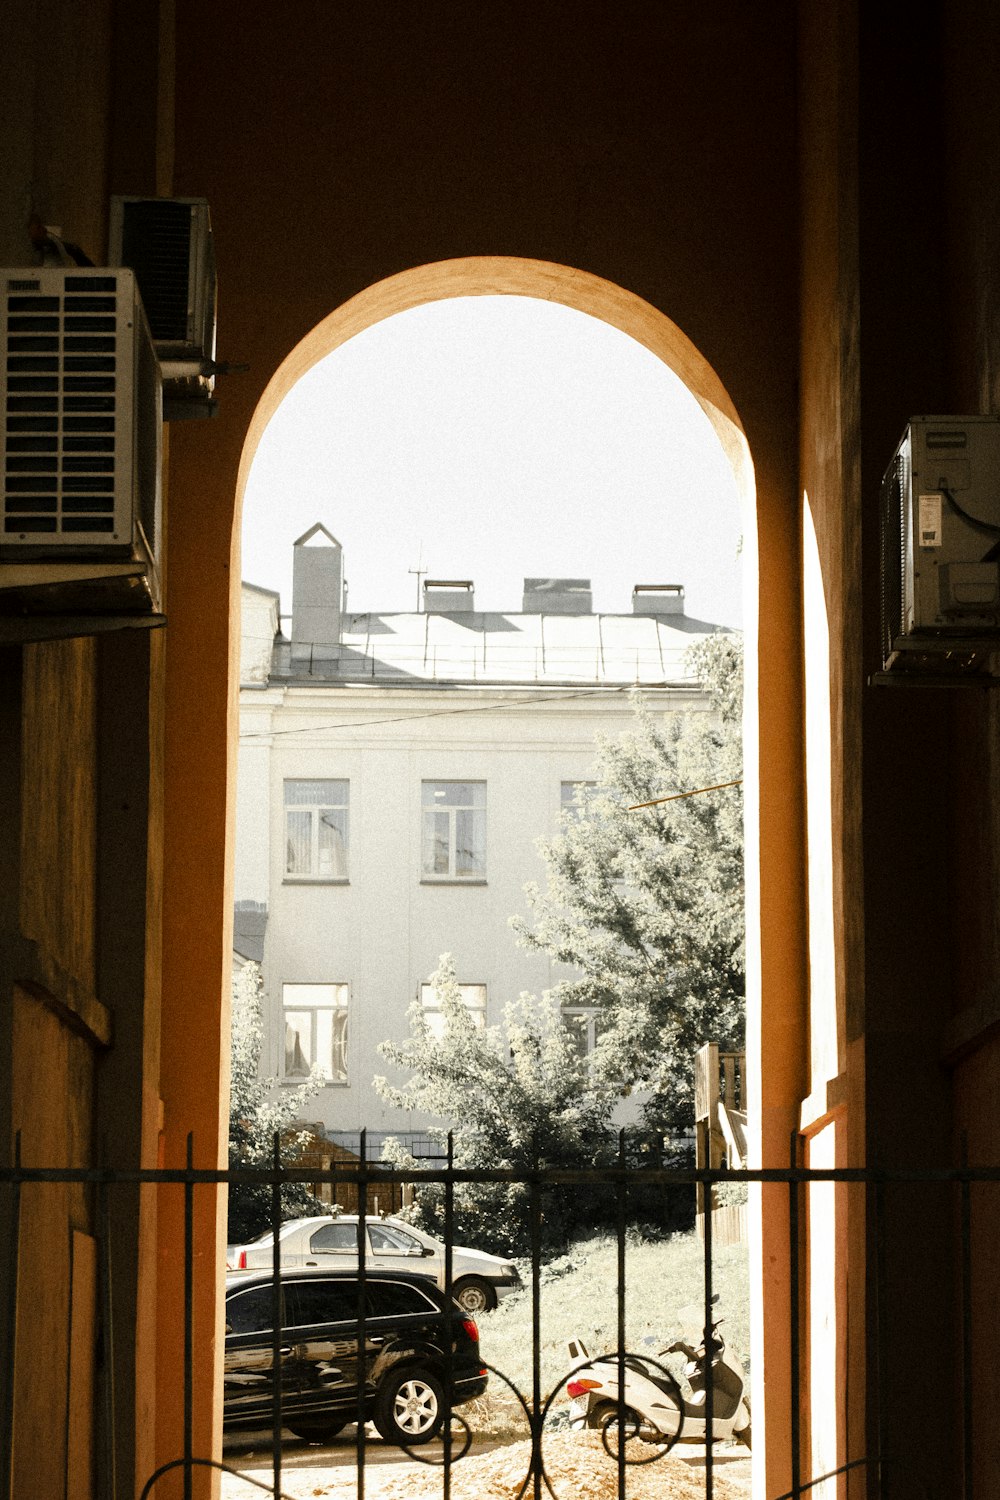 a view of a street through a window of a building